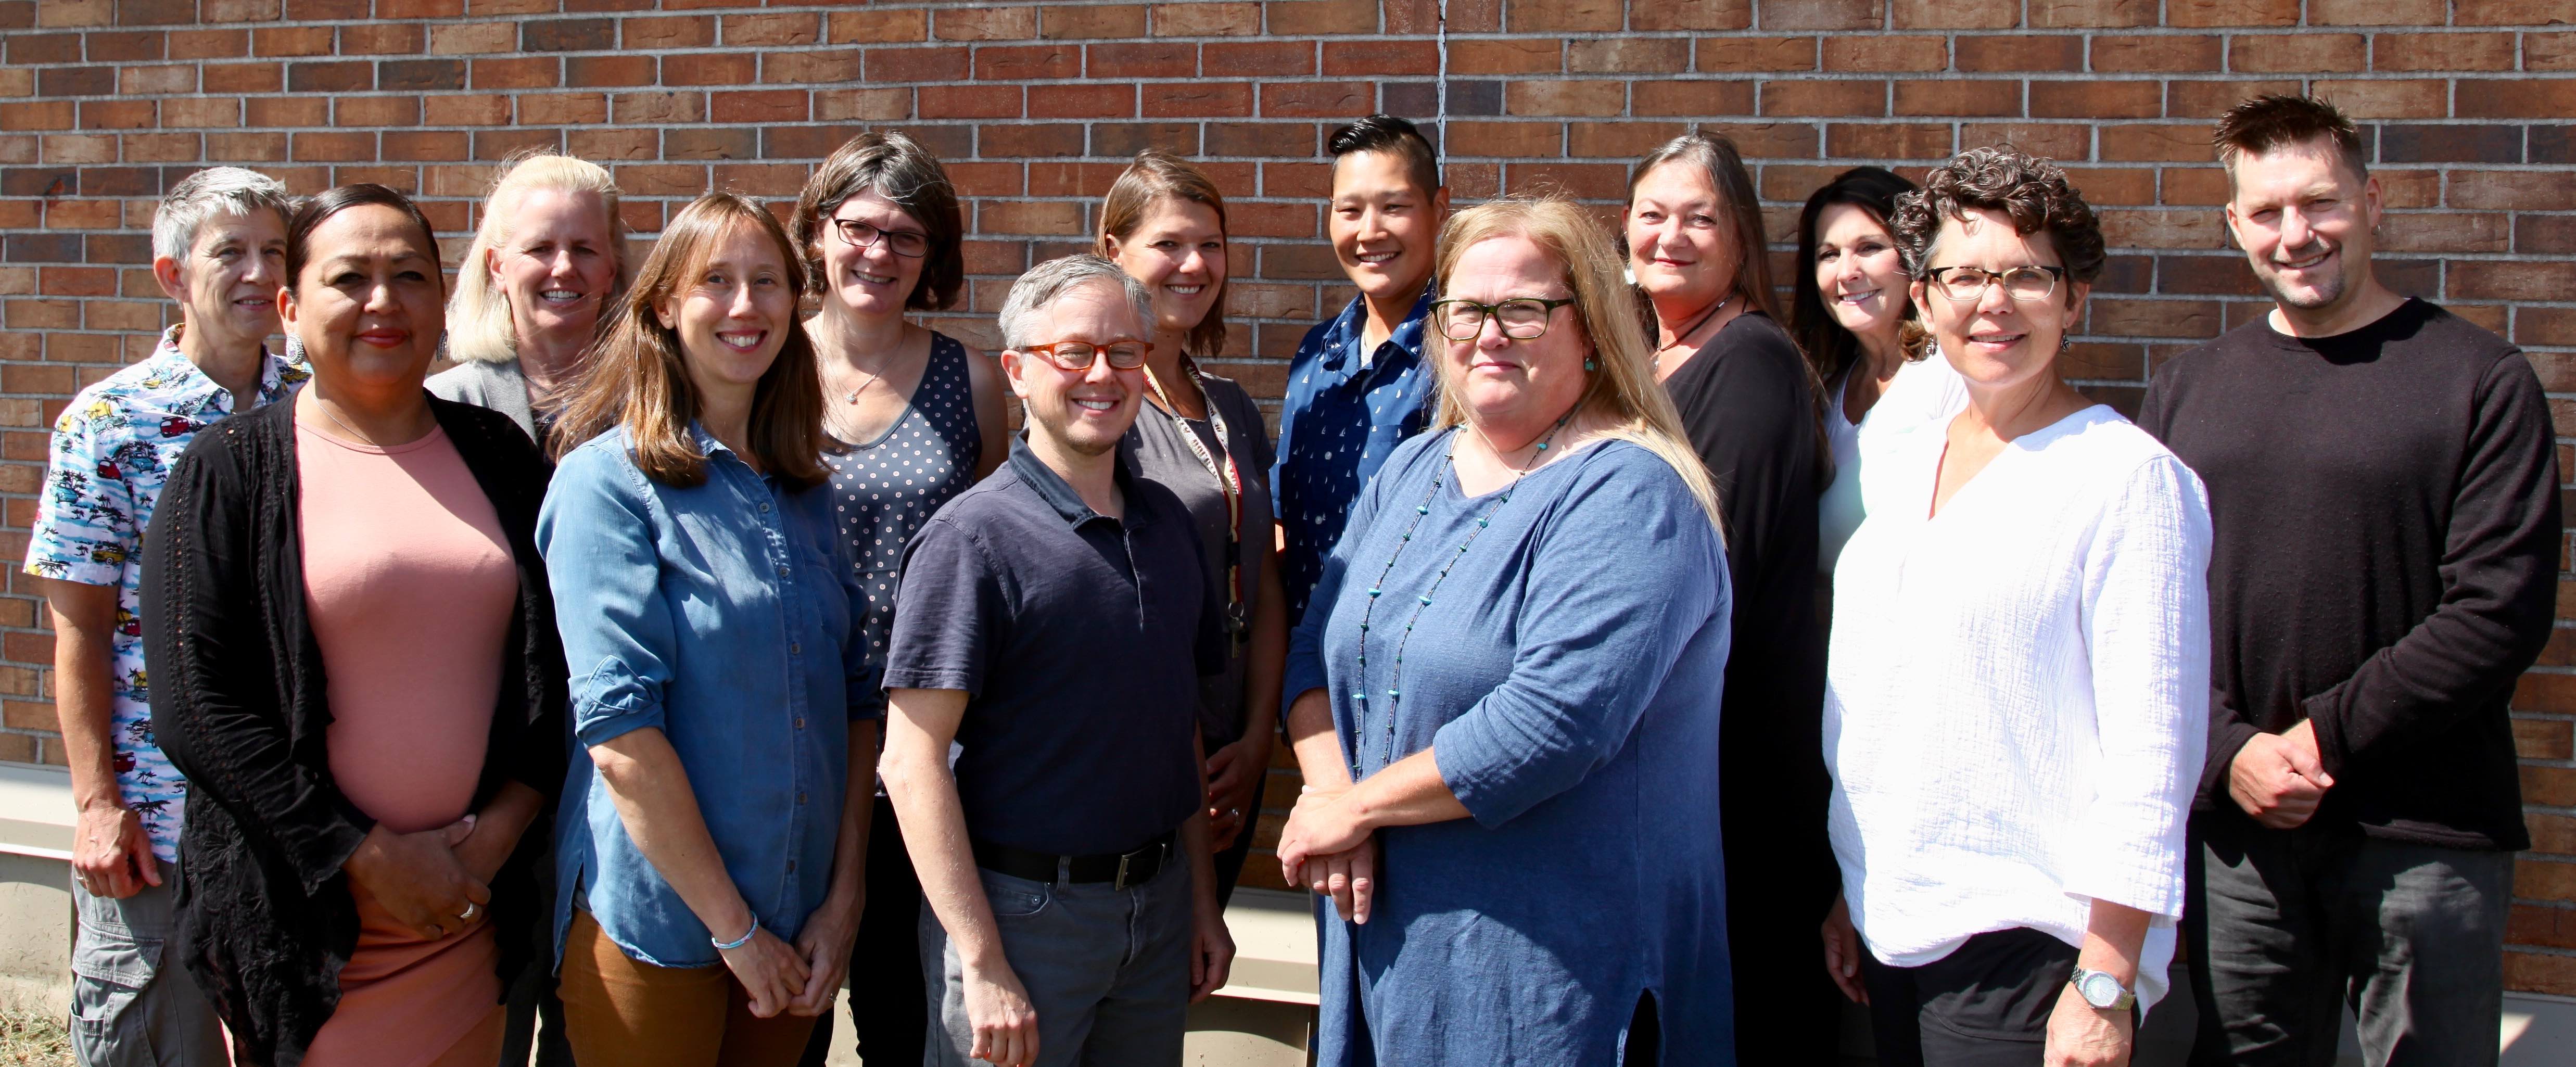 Social Work department faculty and staff posing in front of a brick wall on a sunny day